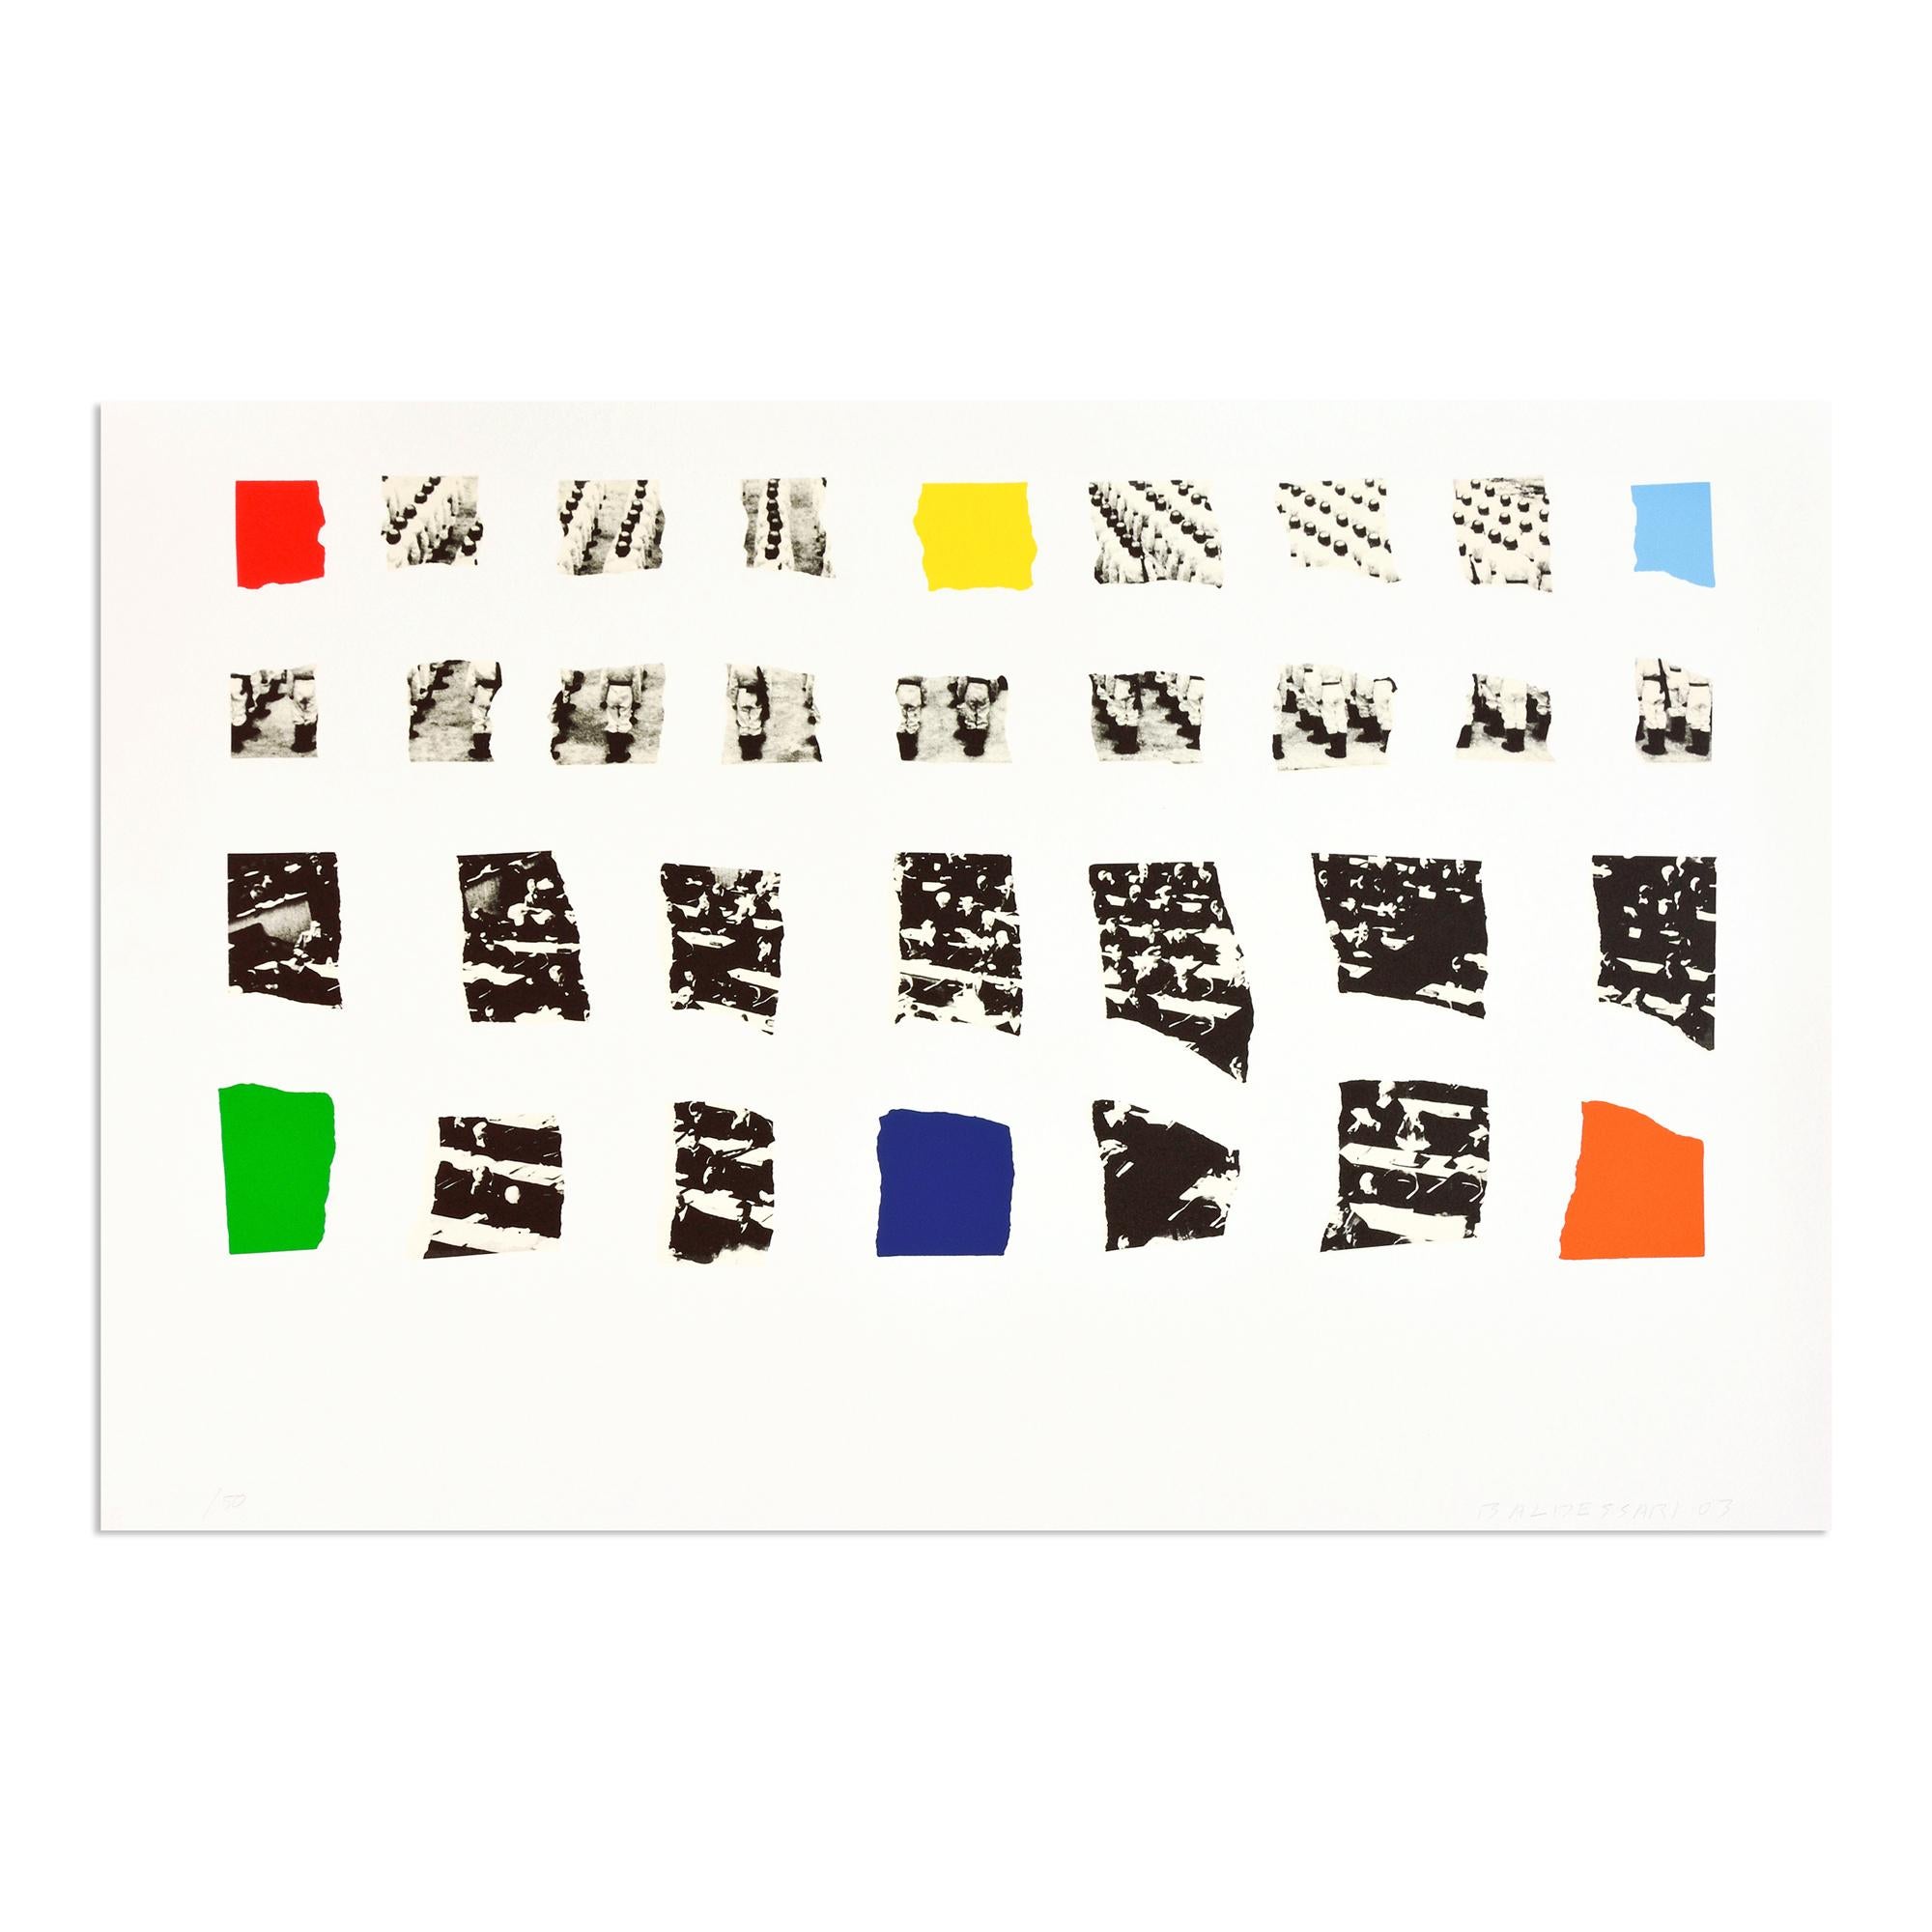 John Baldessari (American, 1931-2020)
Two Assemblages (with R, O, Y, G, B, V Opaque), 2003
Medium: Lithograph and screen print on vellum
Dimensions: 61.6 x 91.5 cm
Edition of 50: Hand signed, numbered and dated
Condition: Excellent